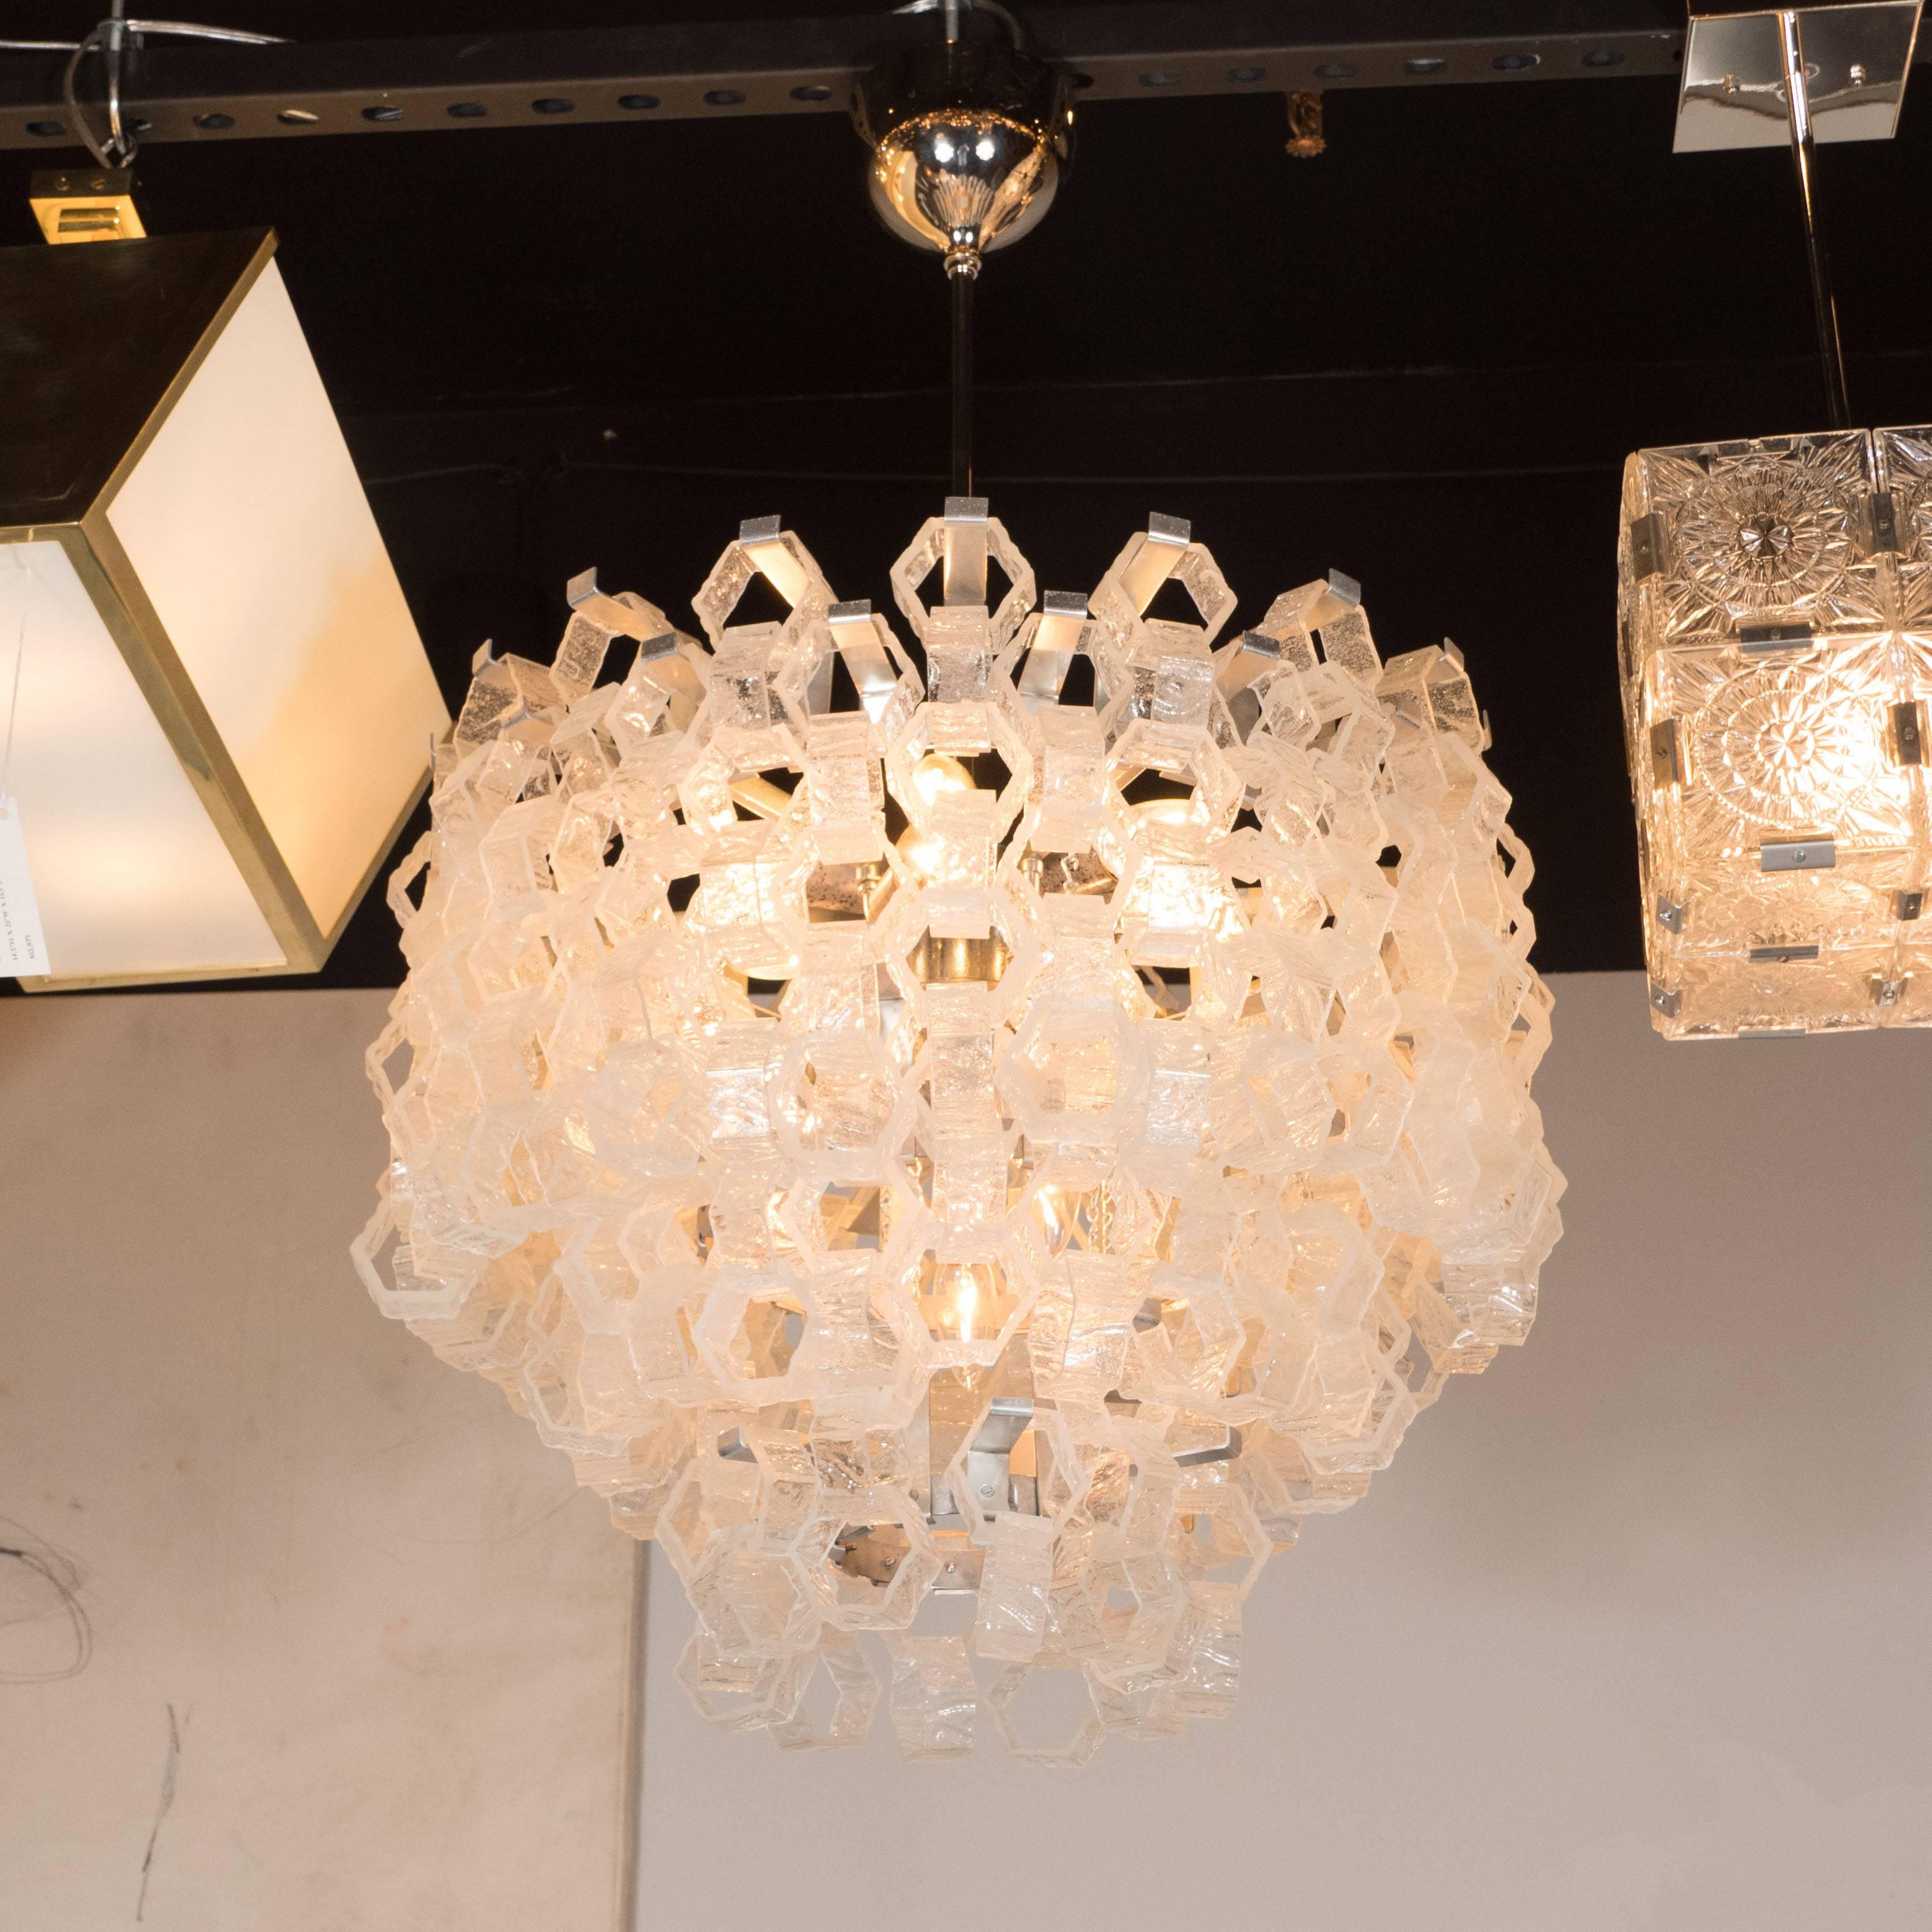 This sophisticated chandelier was produced by the storied glass blowing atelier, Mazzega in Murano, Italy, circa 1970. It features an abundance of hexagonal 